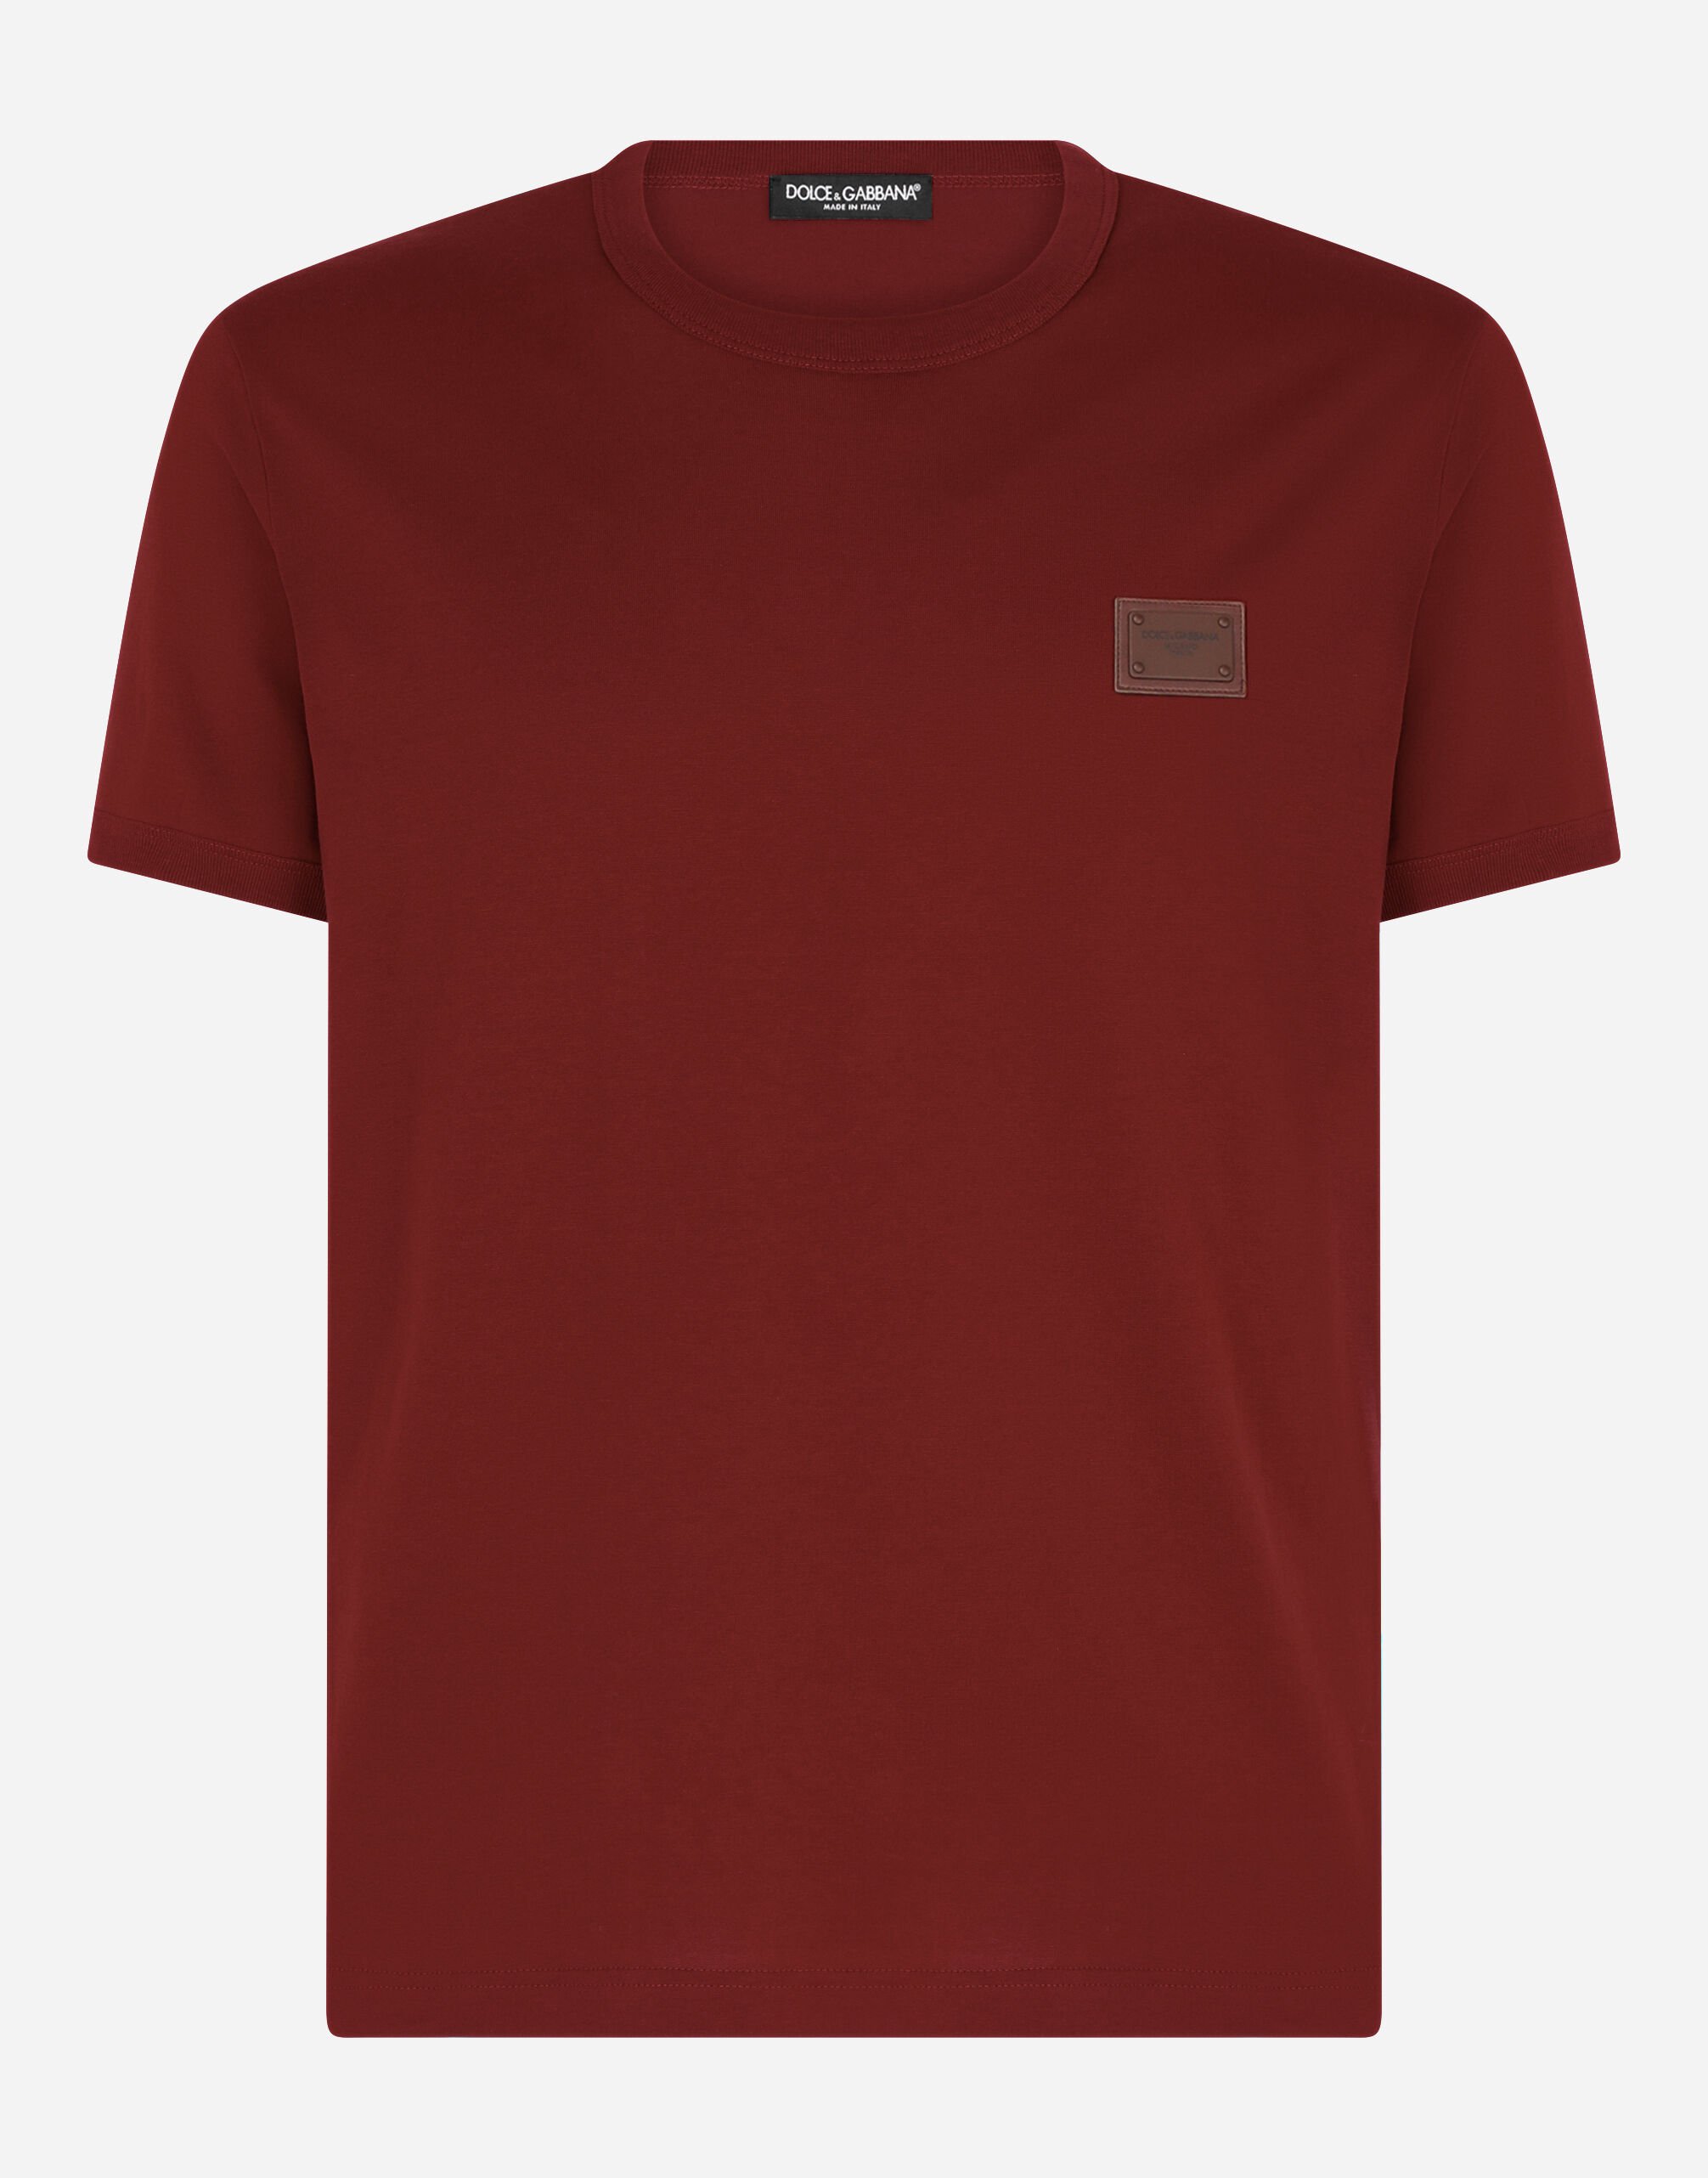 Dolce&Gabbana Cotton V-neck T-shirt with branded plate Bordeaux G8LZ1ZG7WUR